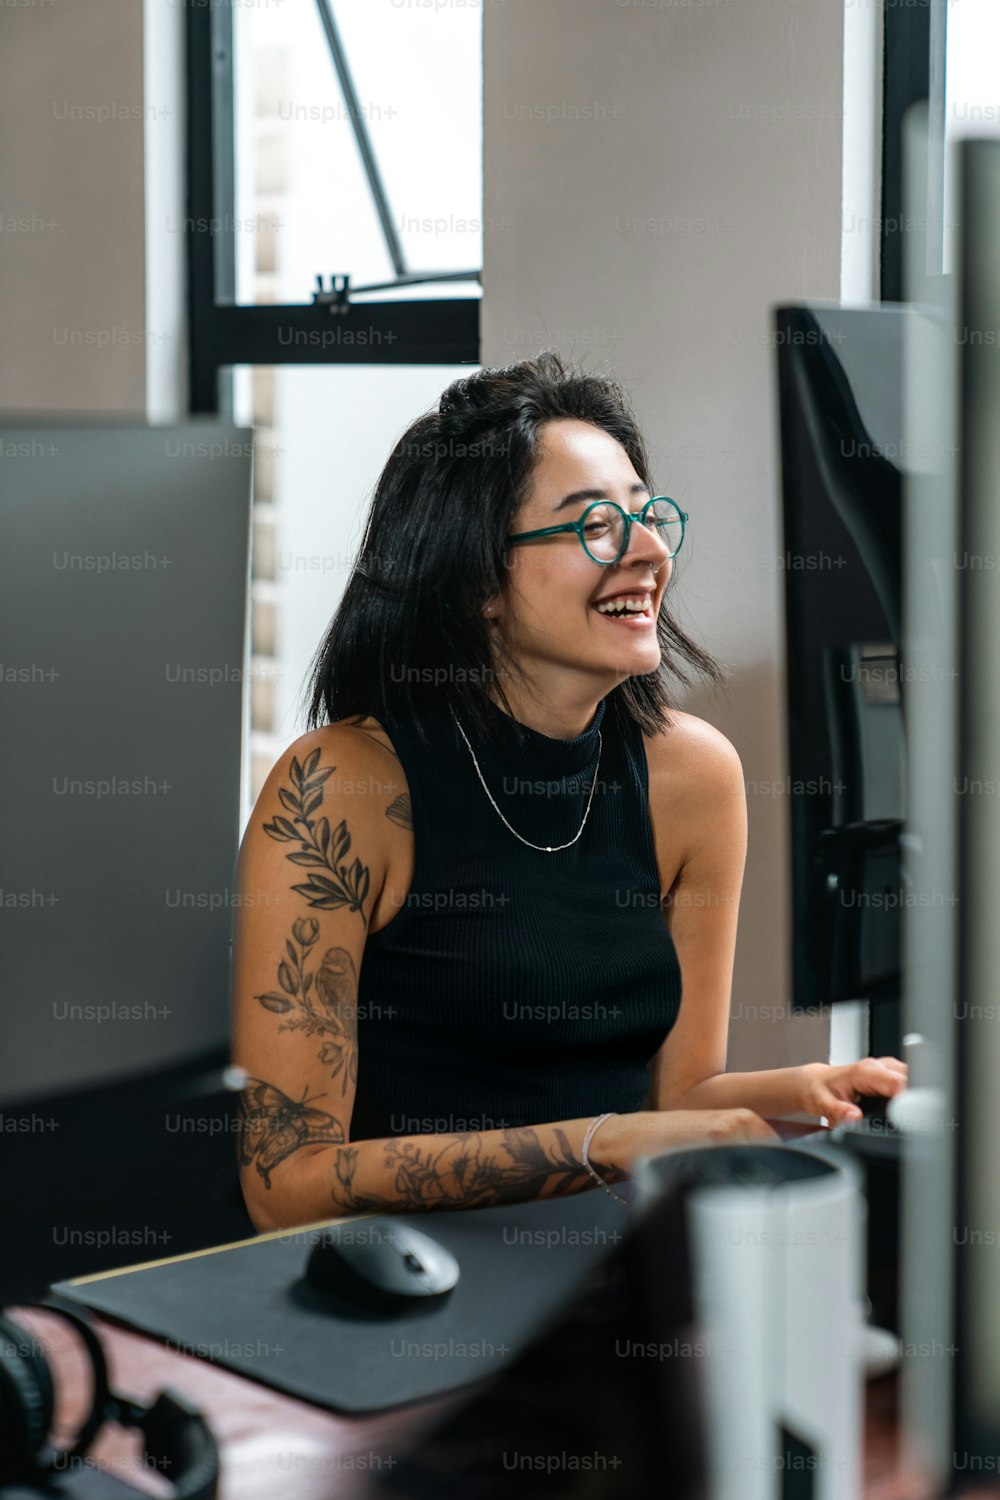 a woman with a tattoo on her arm sitting in front of a computer